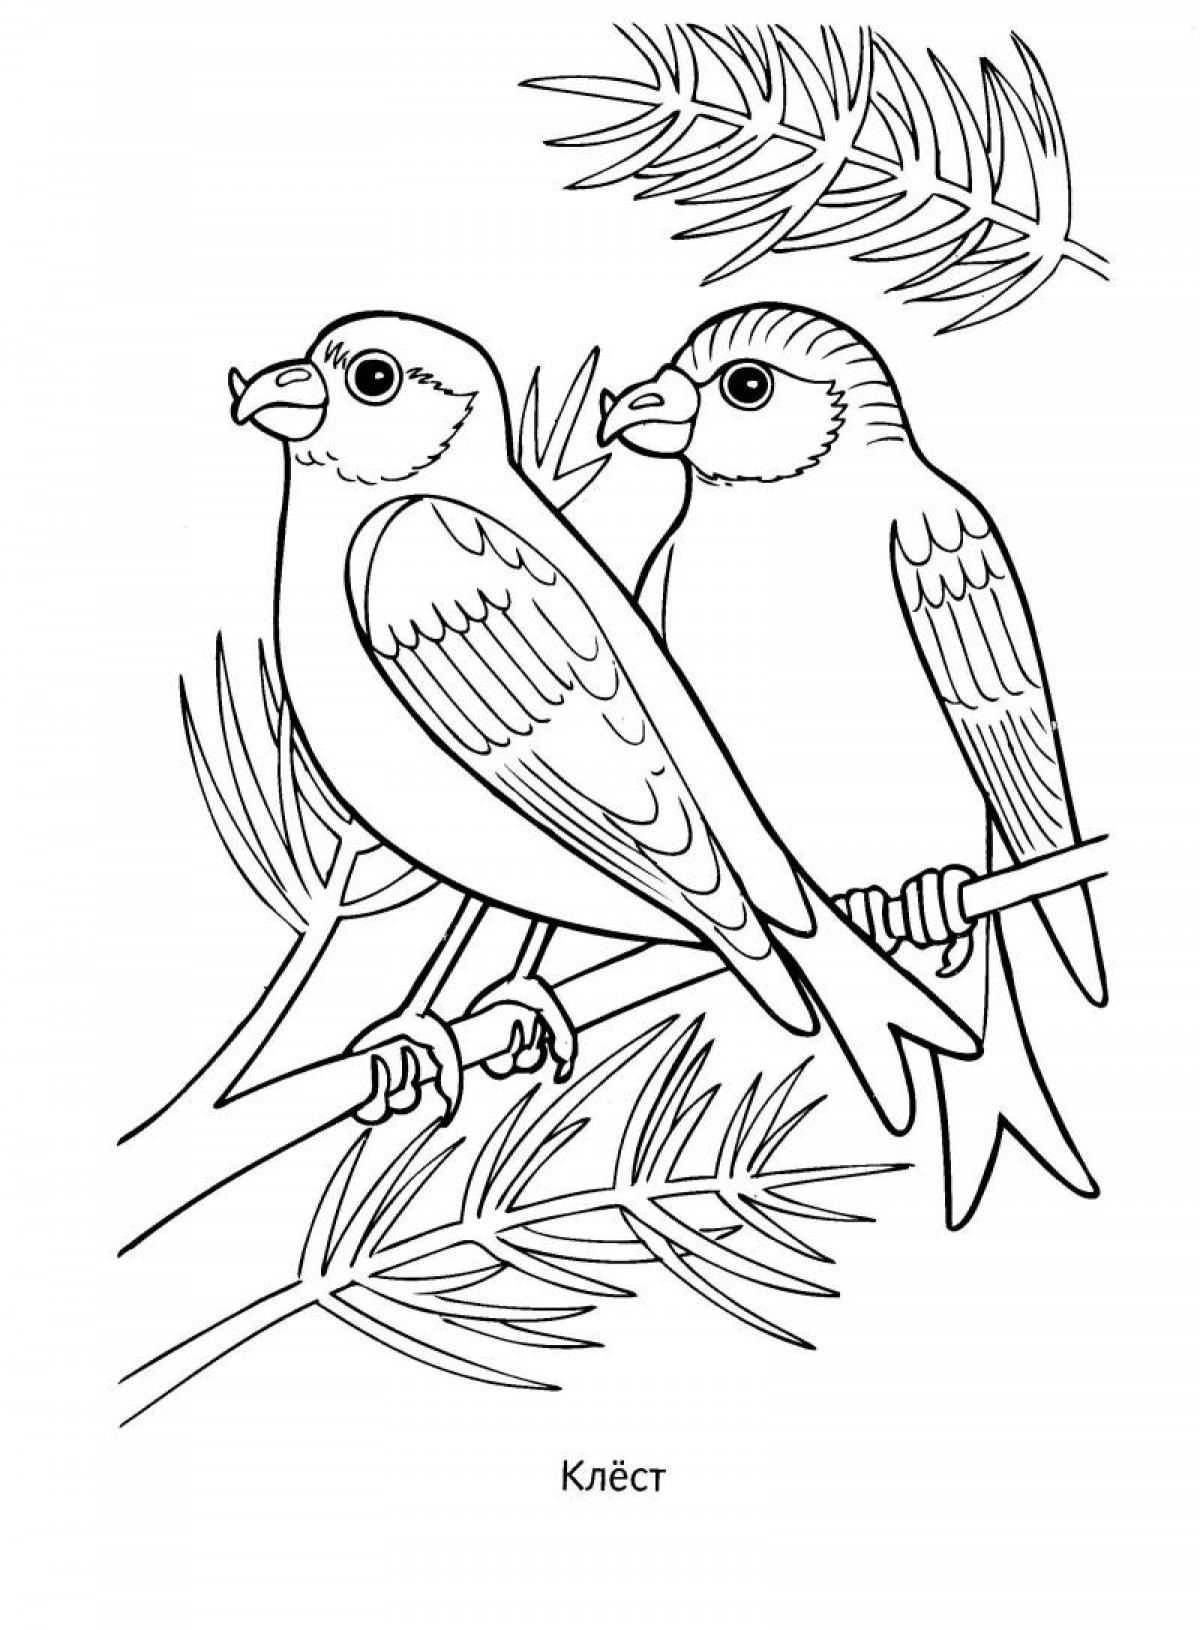 Adorable wintering birds coloring book for kids